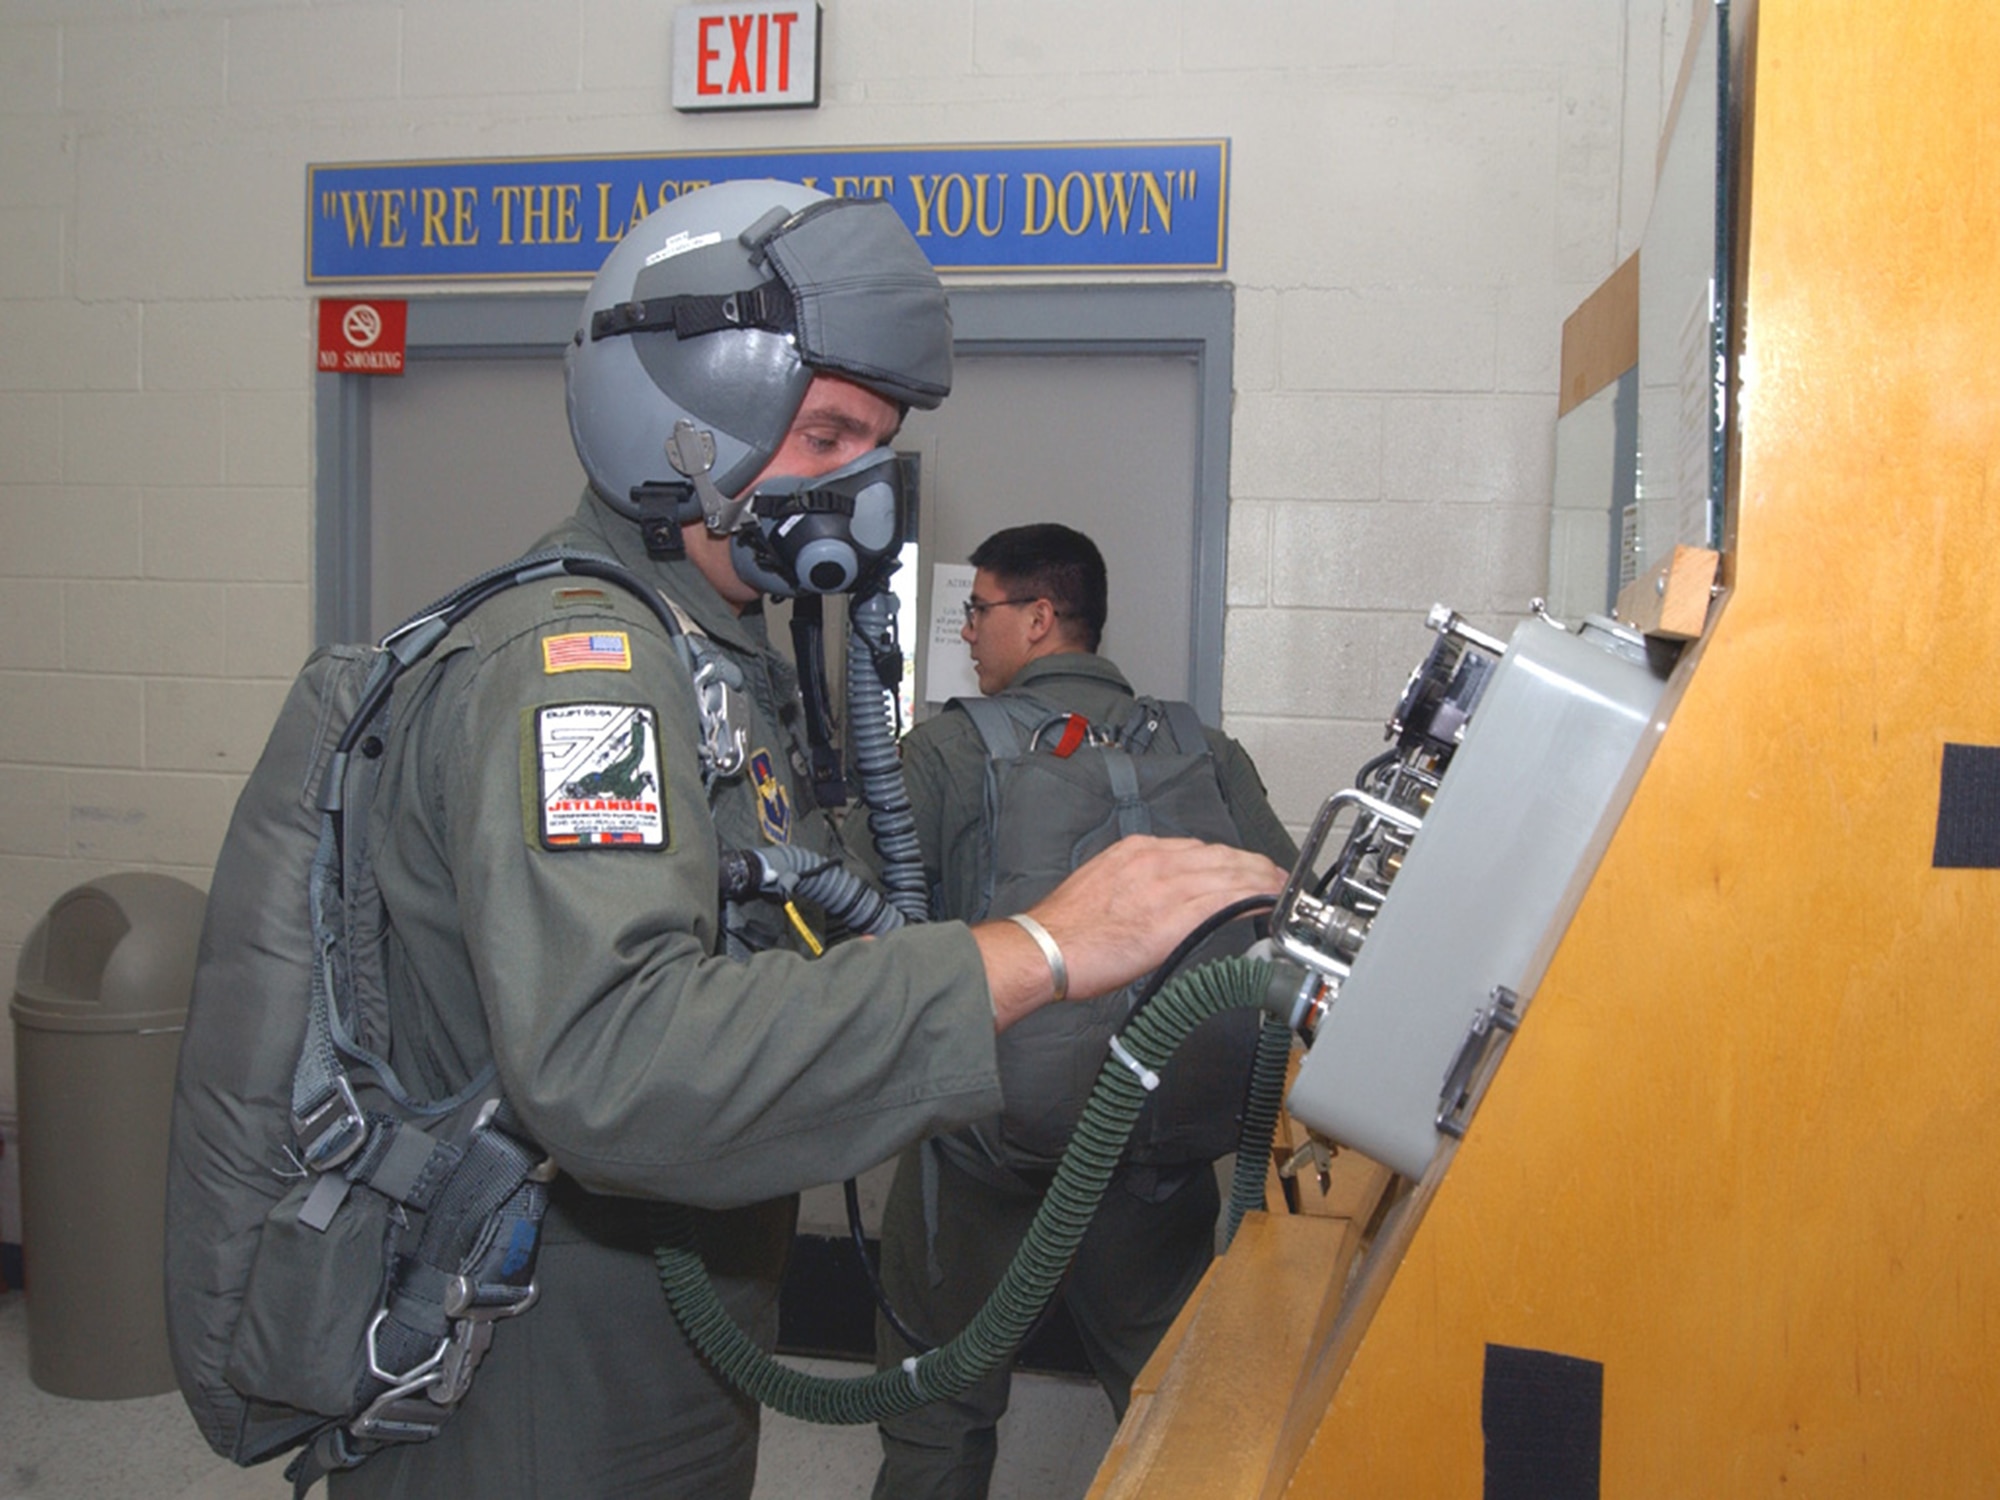 A Euro-NATO Joint Jet Pilot Training student pilot runs a safety check on his oxygen equipment as part of his pre-flight process at Sheppard Air Force Base, Texas. This equipment, which provides oxygen to the pilot, helps prevent the effects of hypoxia and carbon monoxide poisoning while flying at high altitudes. (U.S. Air Force Photo/82nd Training Wing Public Affairs)